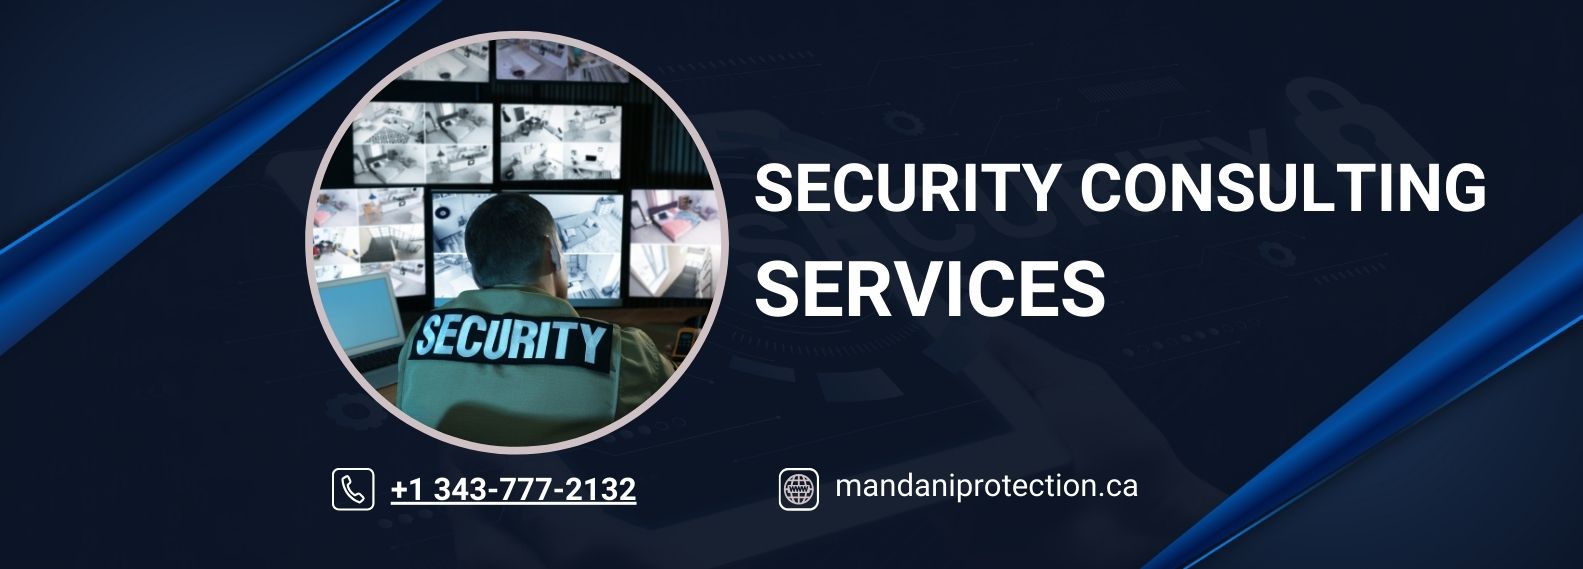 SECURITY CONSULTING SERVICES